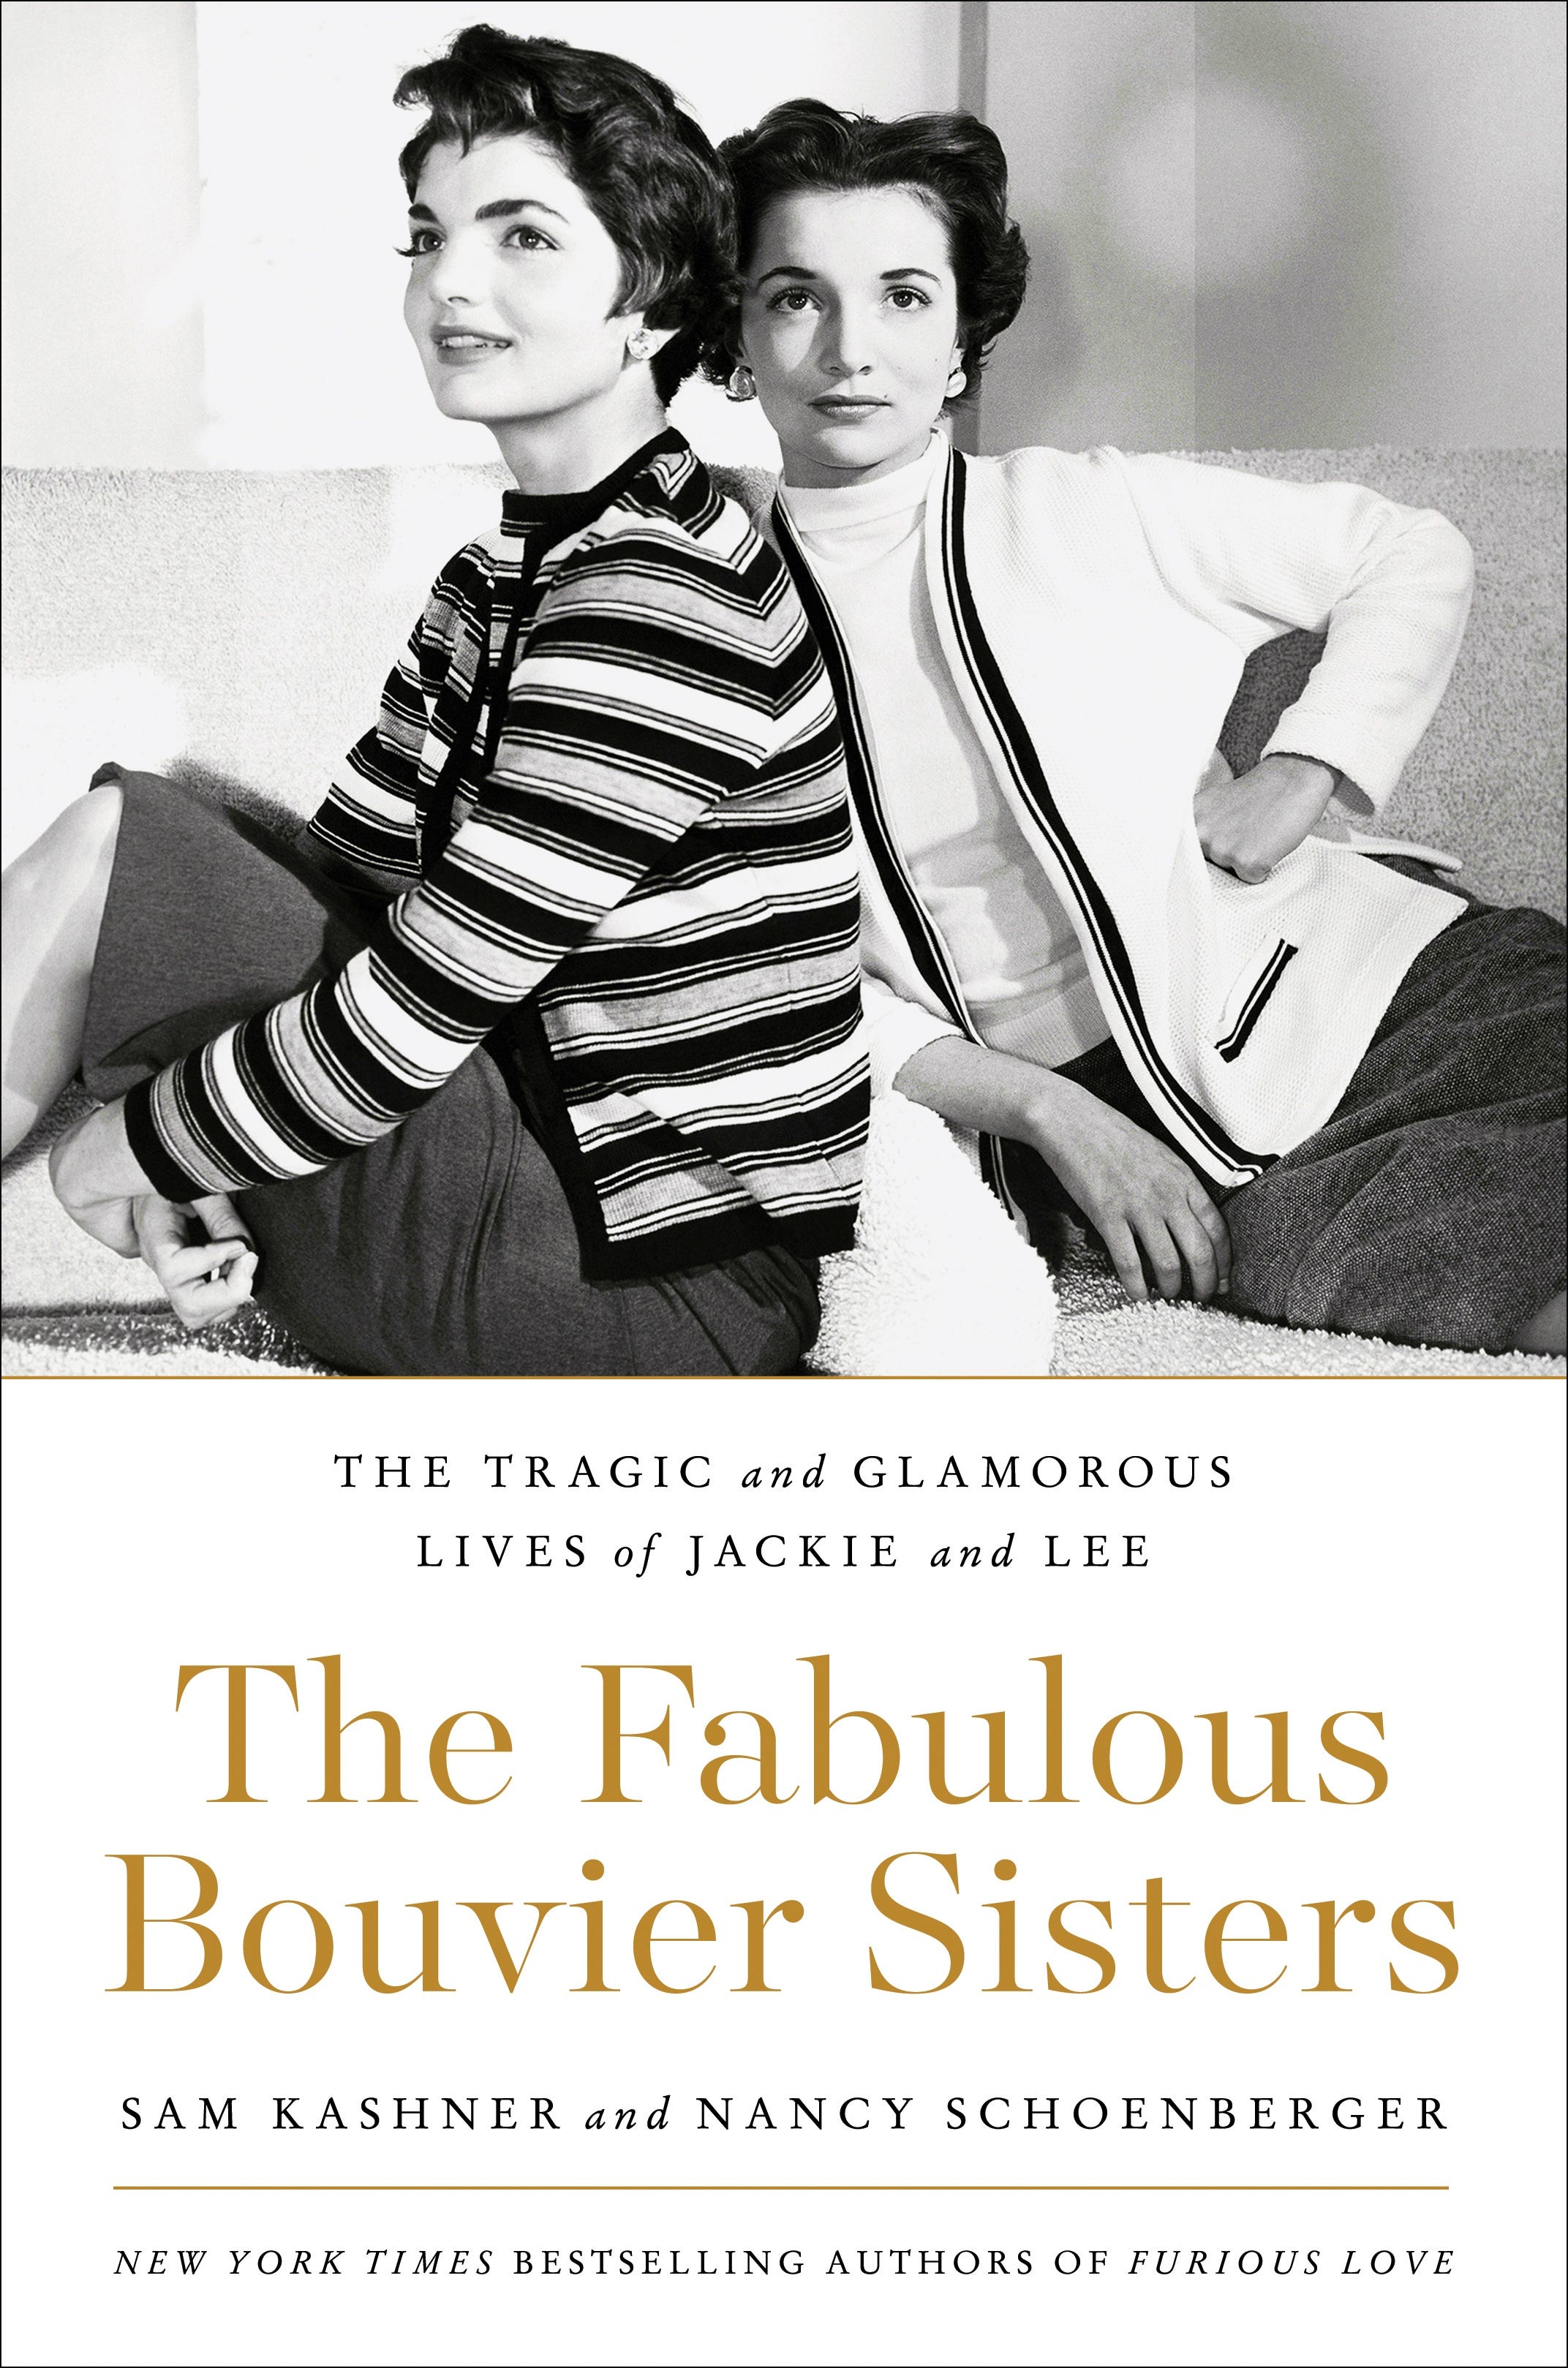 Book looks at the lives, rivalry of Bouvier sisters Jackie and Lee